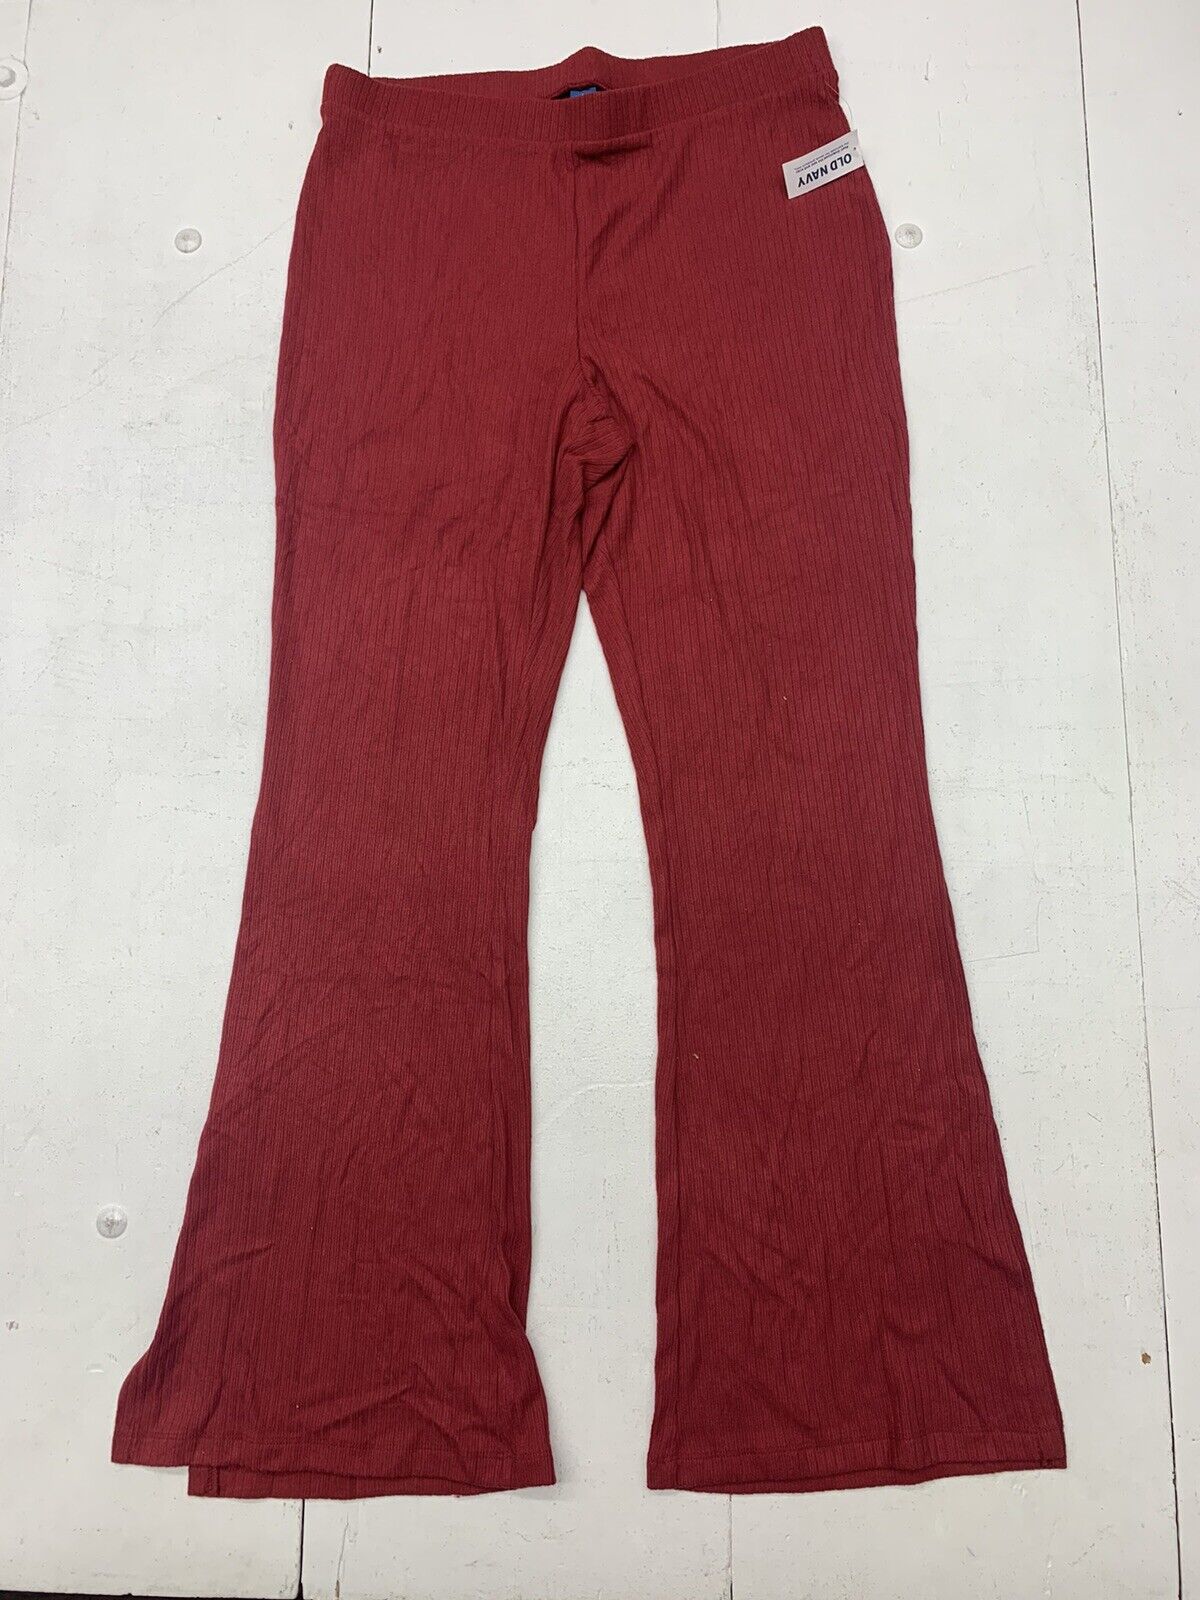 Old Navy Womens Red Flare Pants Size Large - beyond exchange